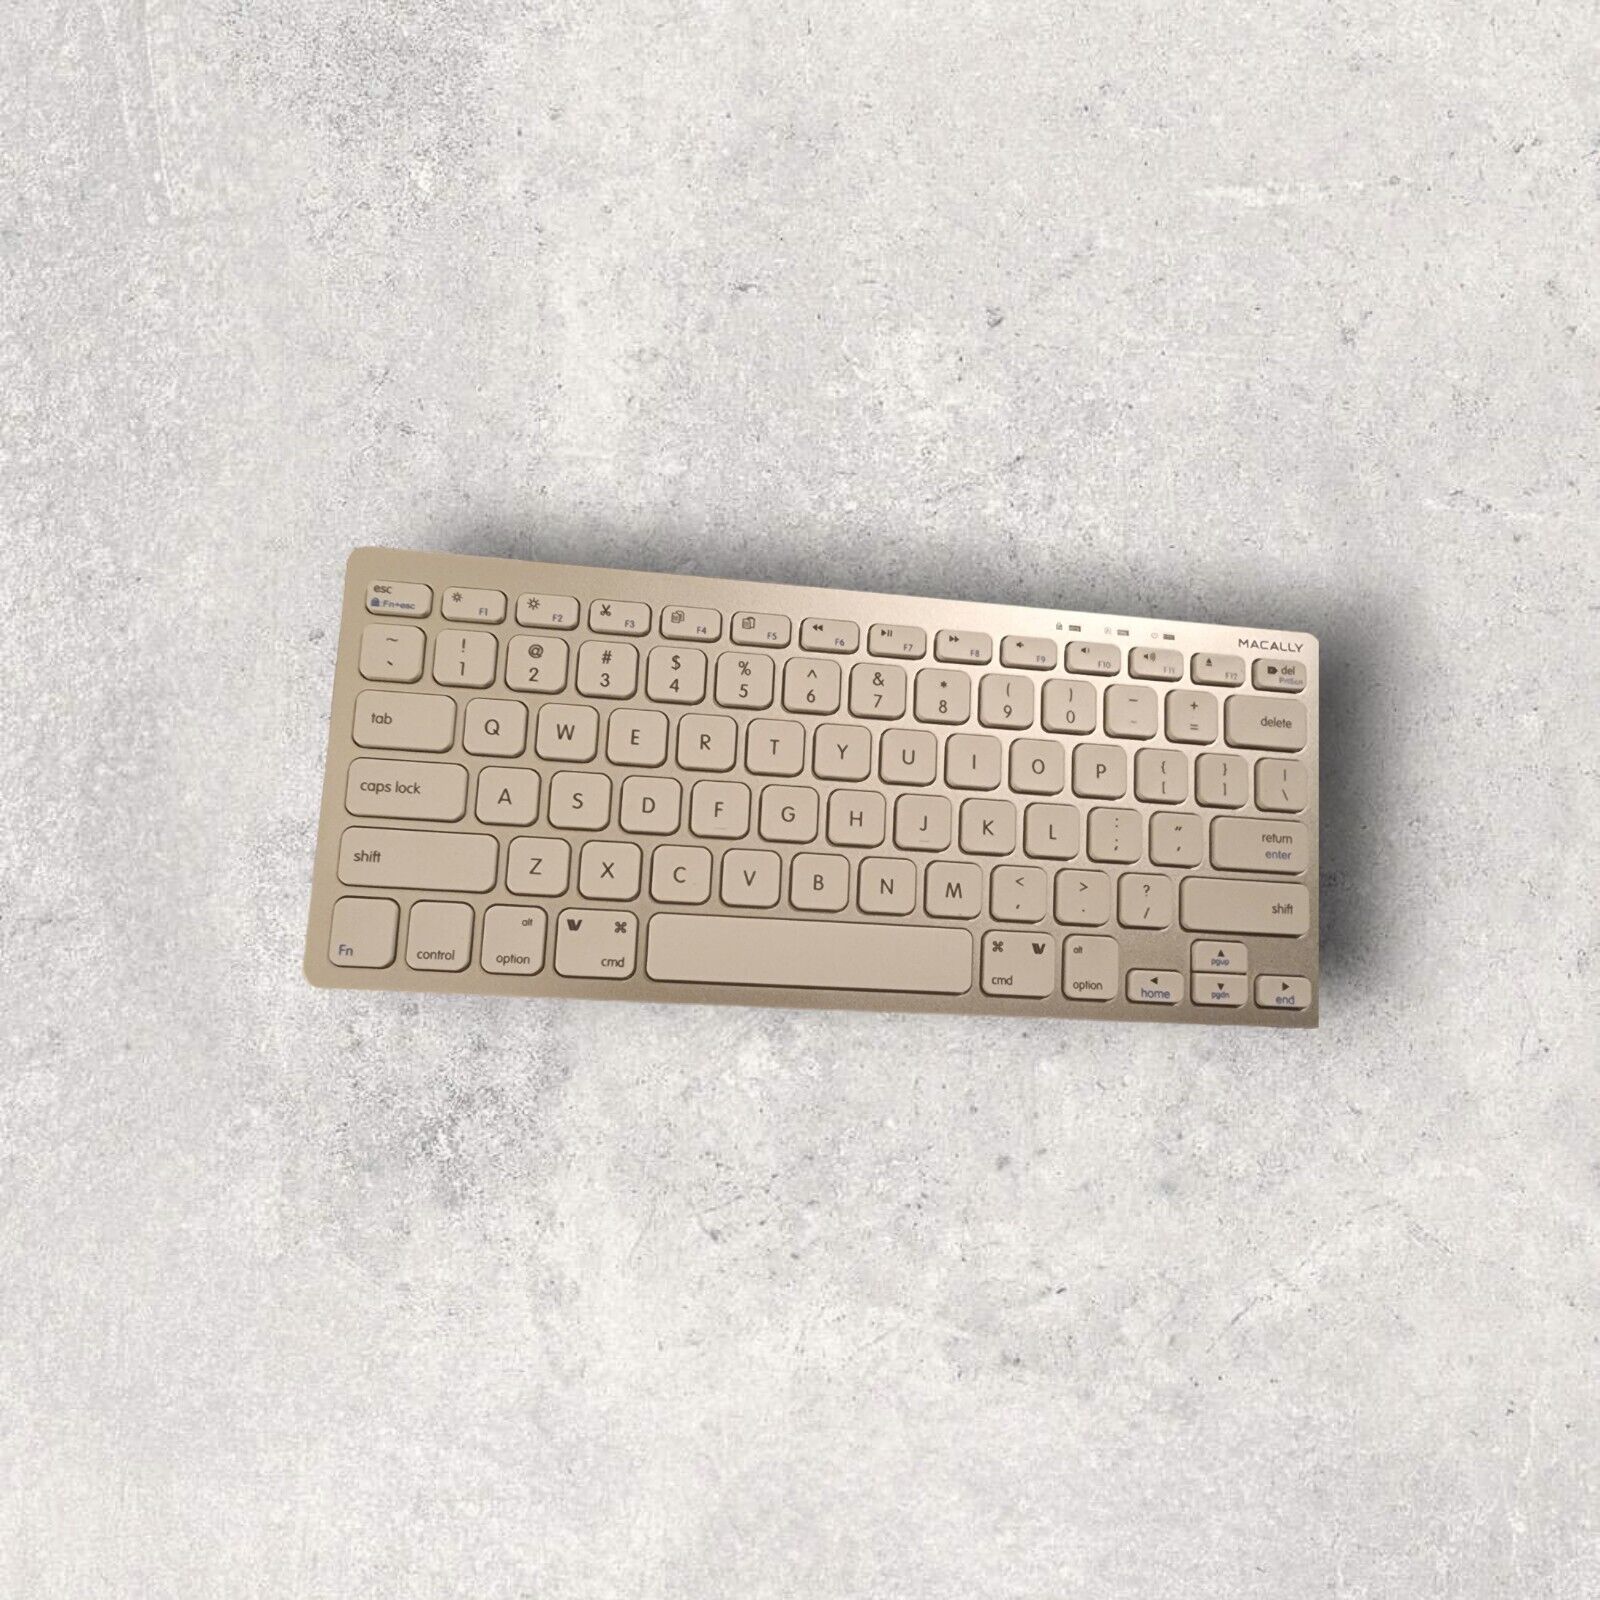 Macally Keyboard Smallest and Most Compact Slimkeyca Apple